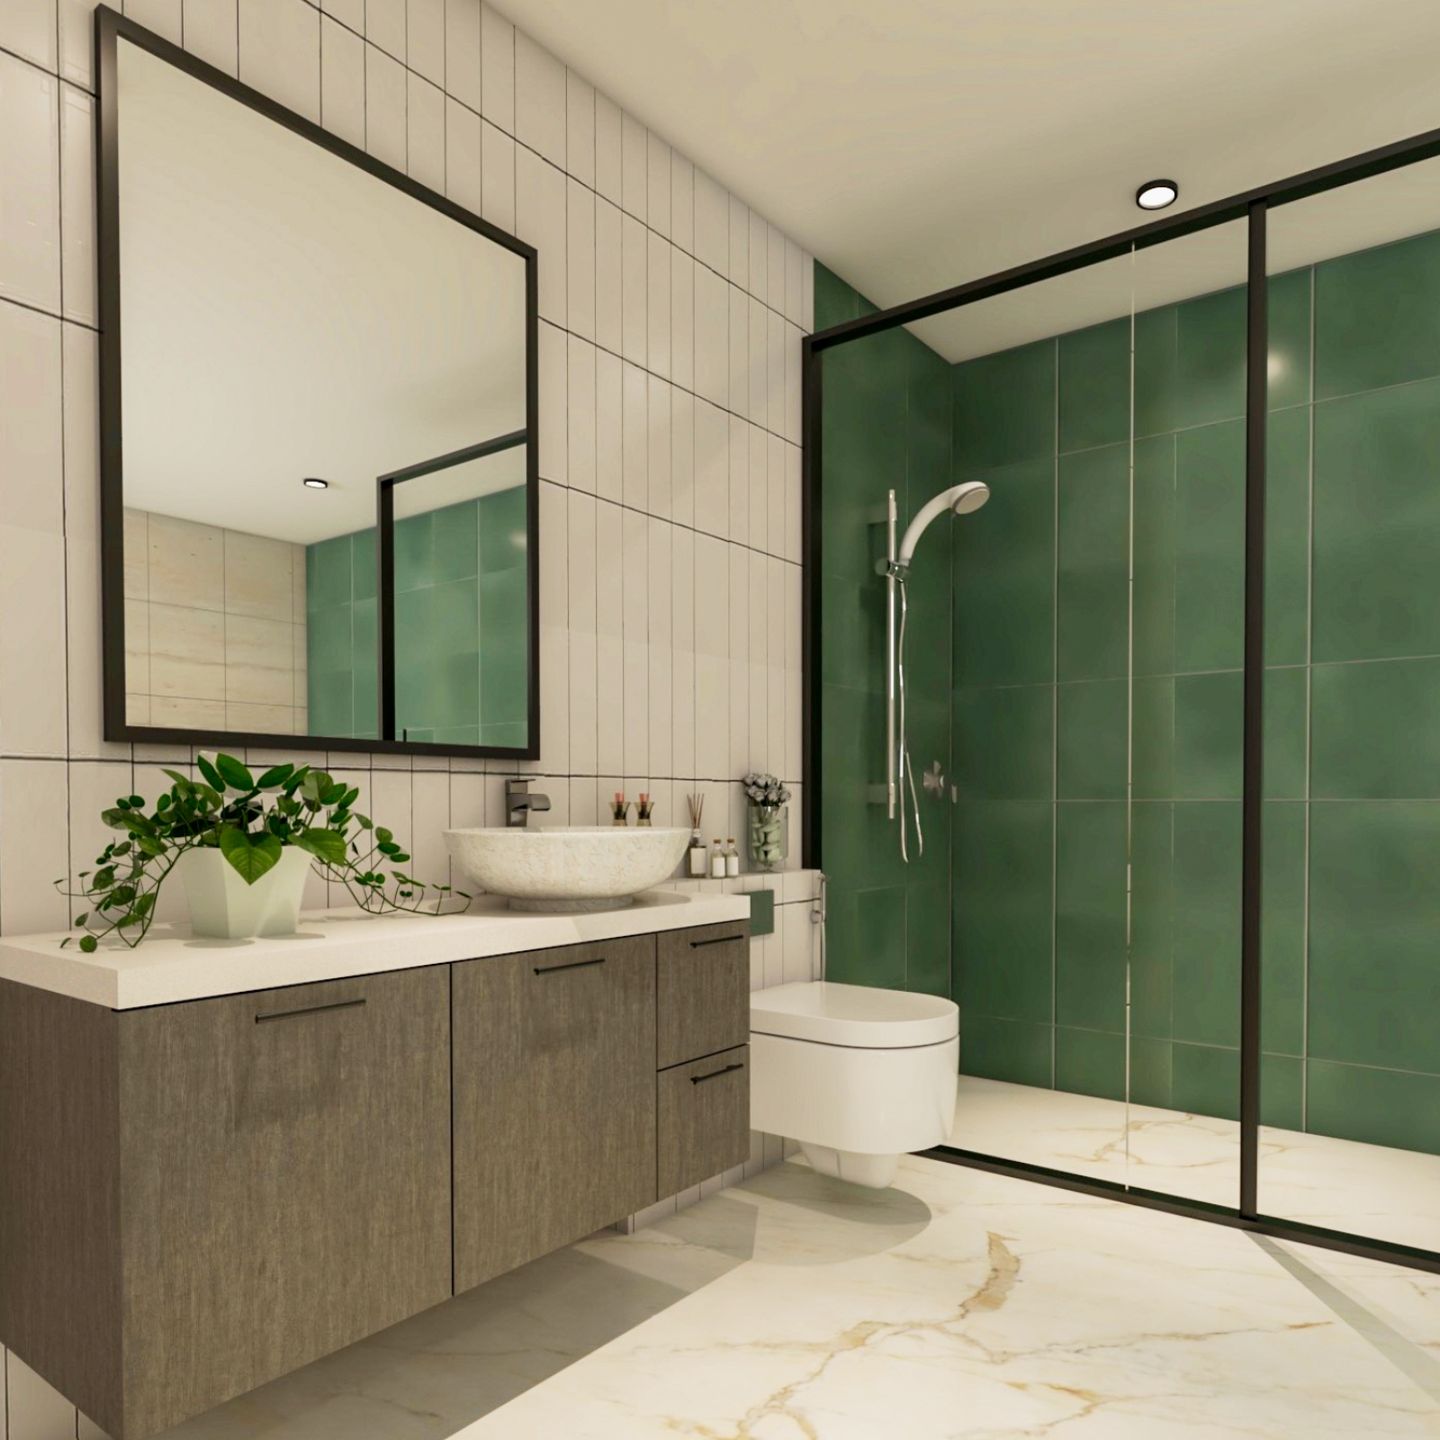 Green And White Small Bathroom Design With Marble Flooring - Livspace